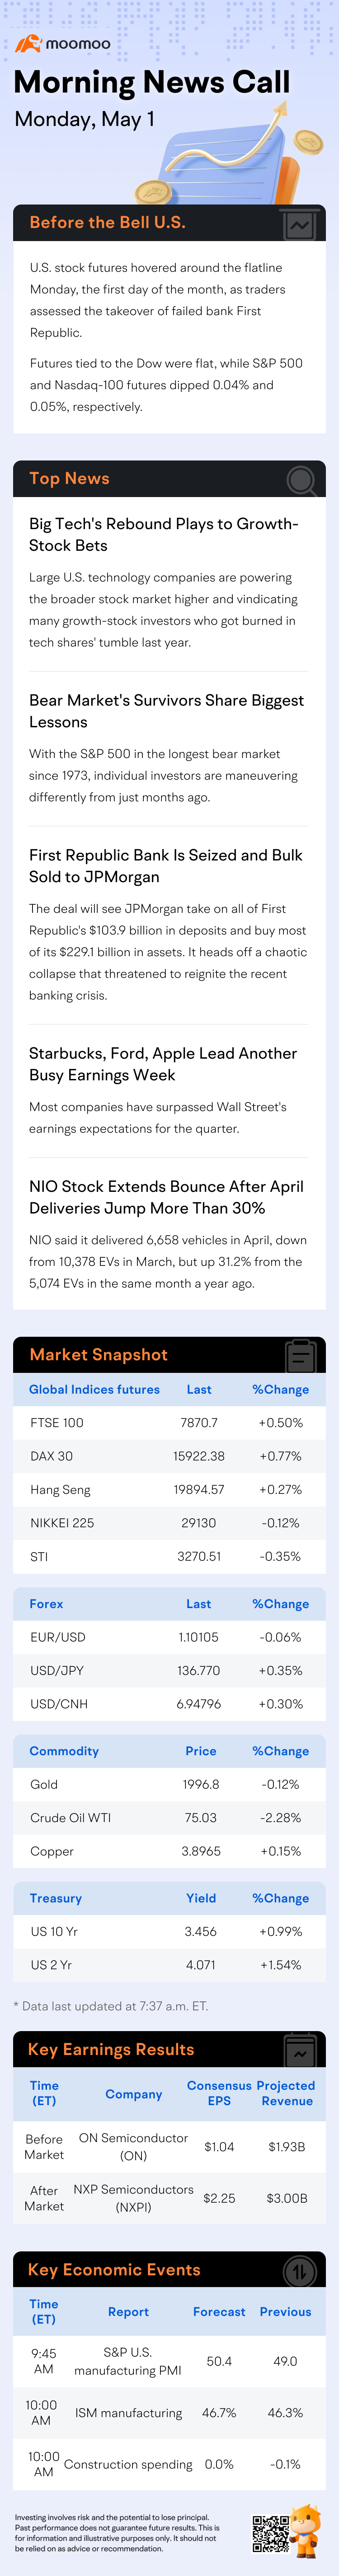 Before the Bell | NIO Stock Extends Bounce After April Deliveries Jump More Than 30%